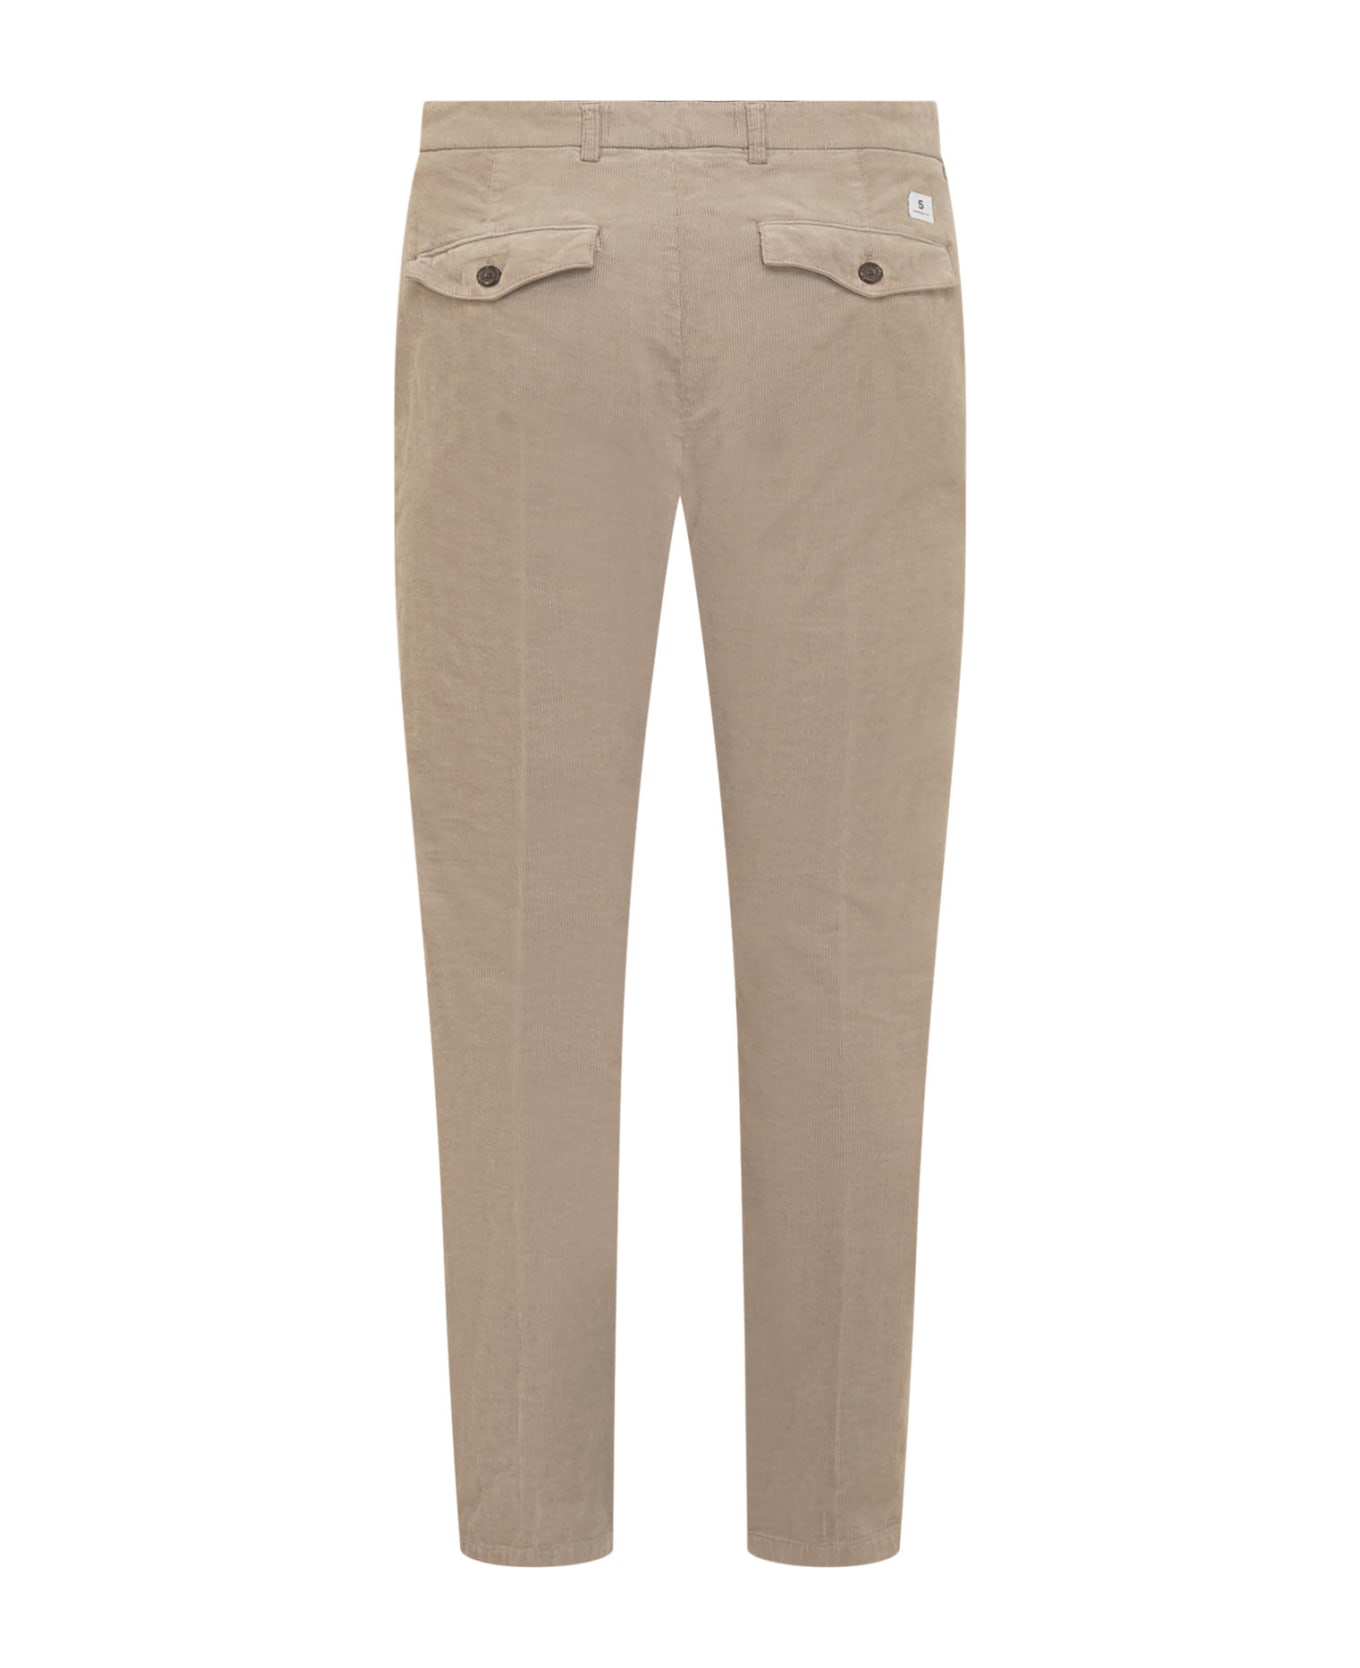 Department Five Prince Trousers Chinos - SAND ボトムス